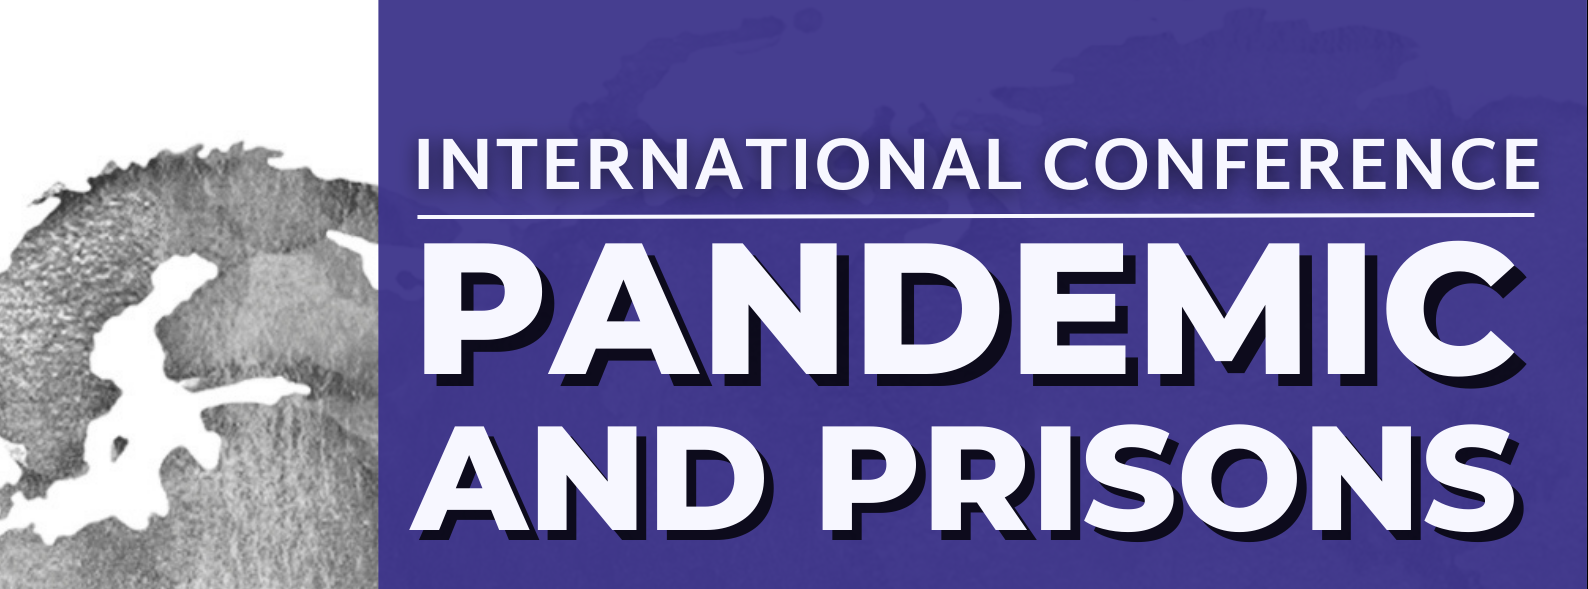 Pandemic and Prisons International Conference